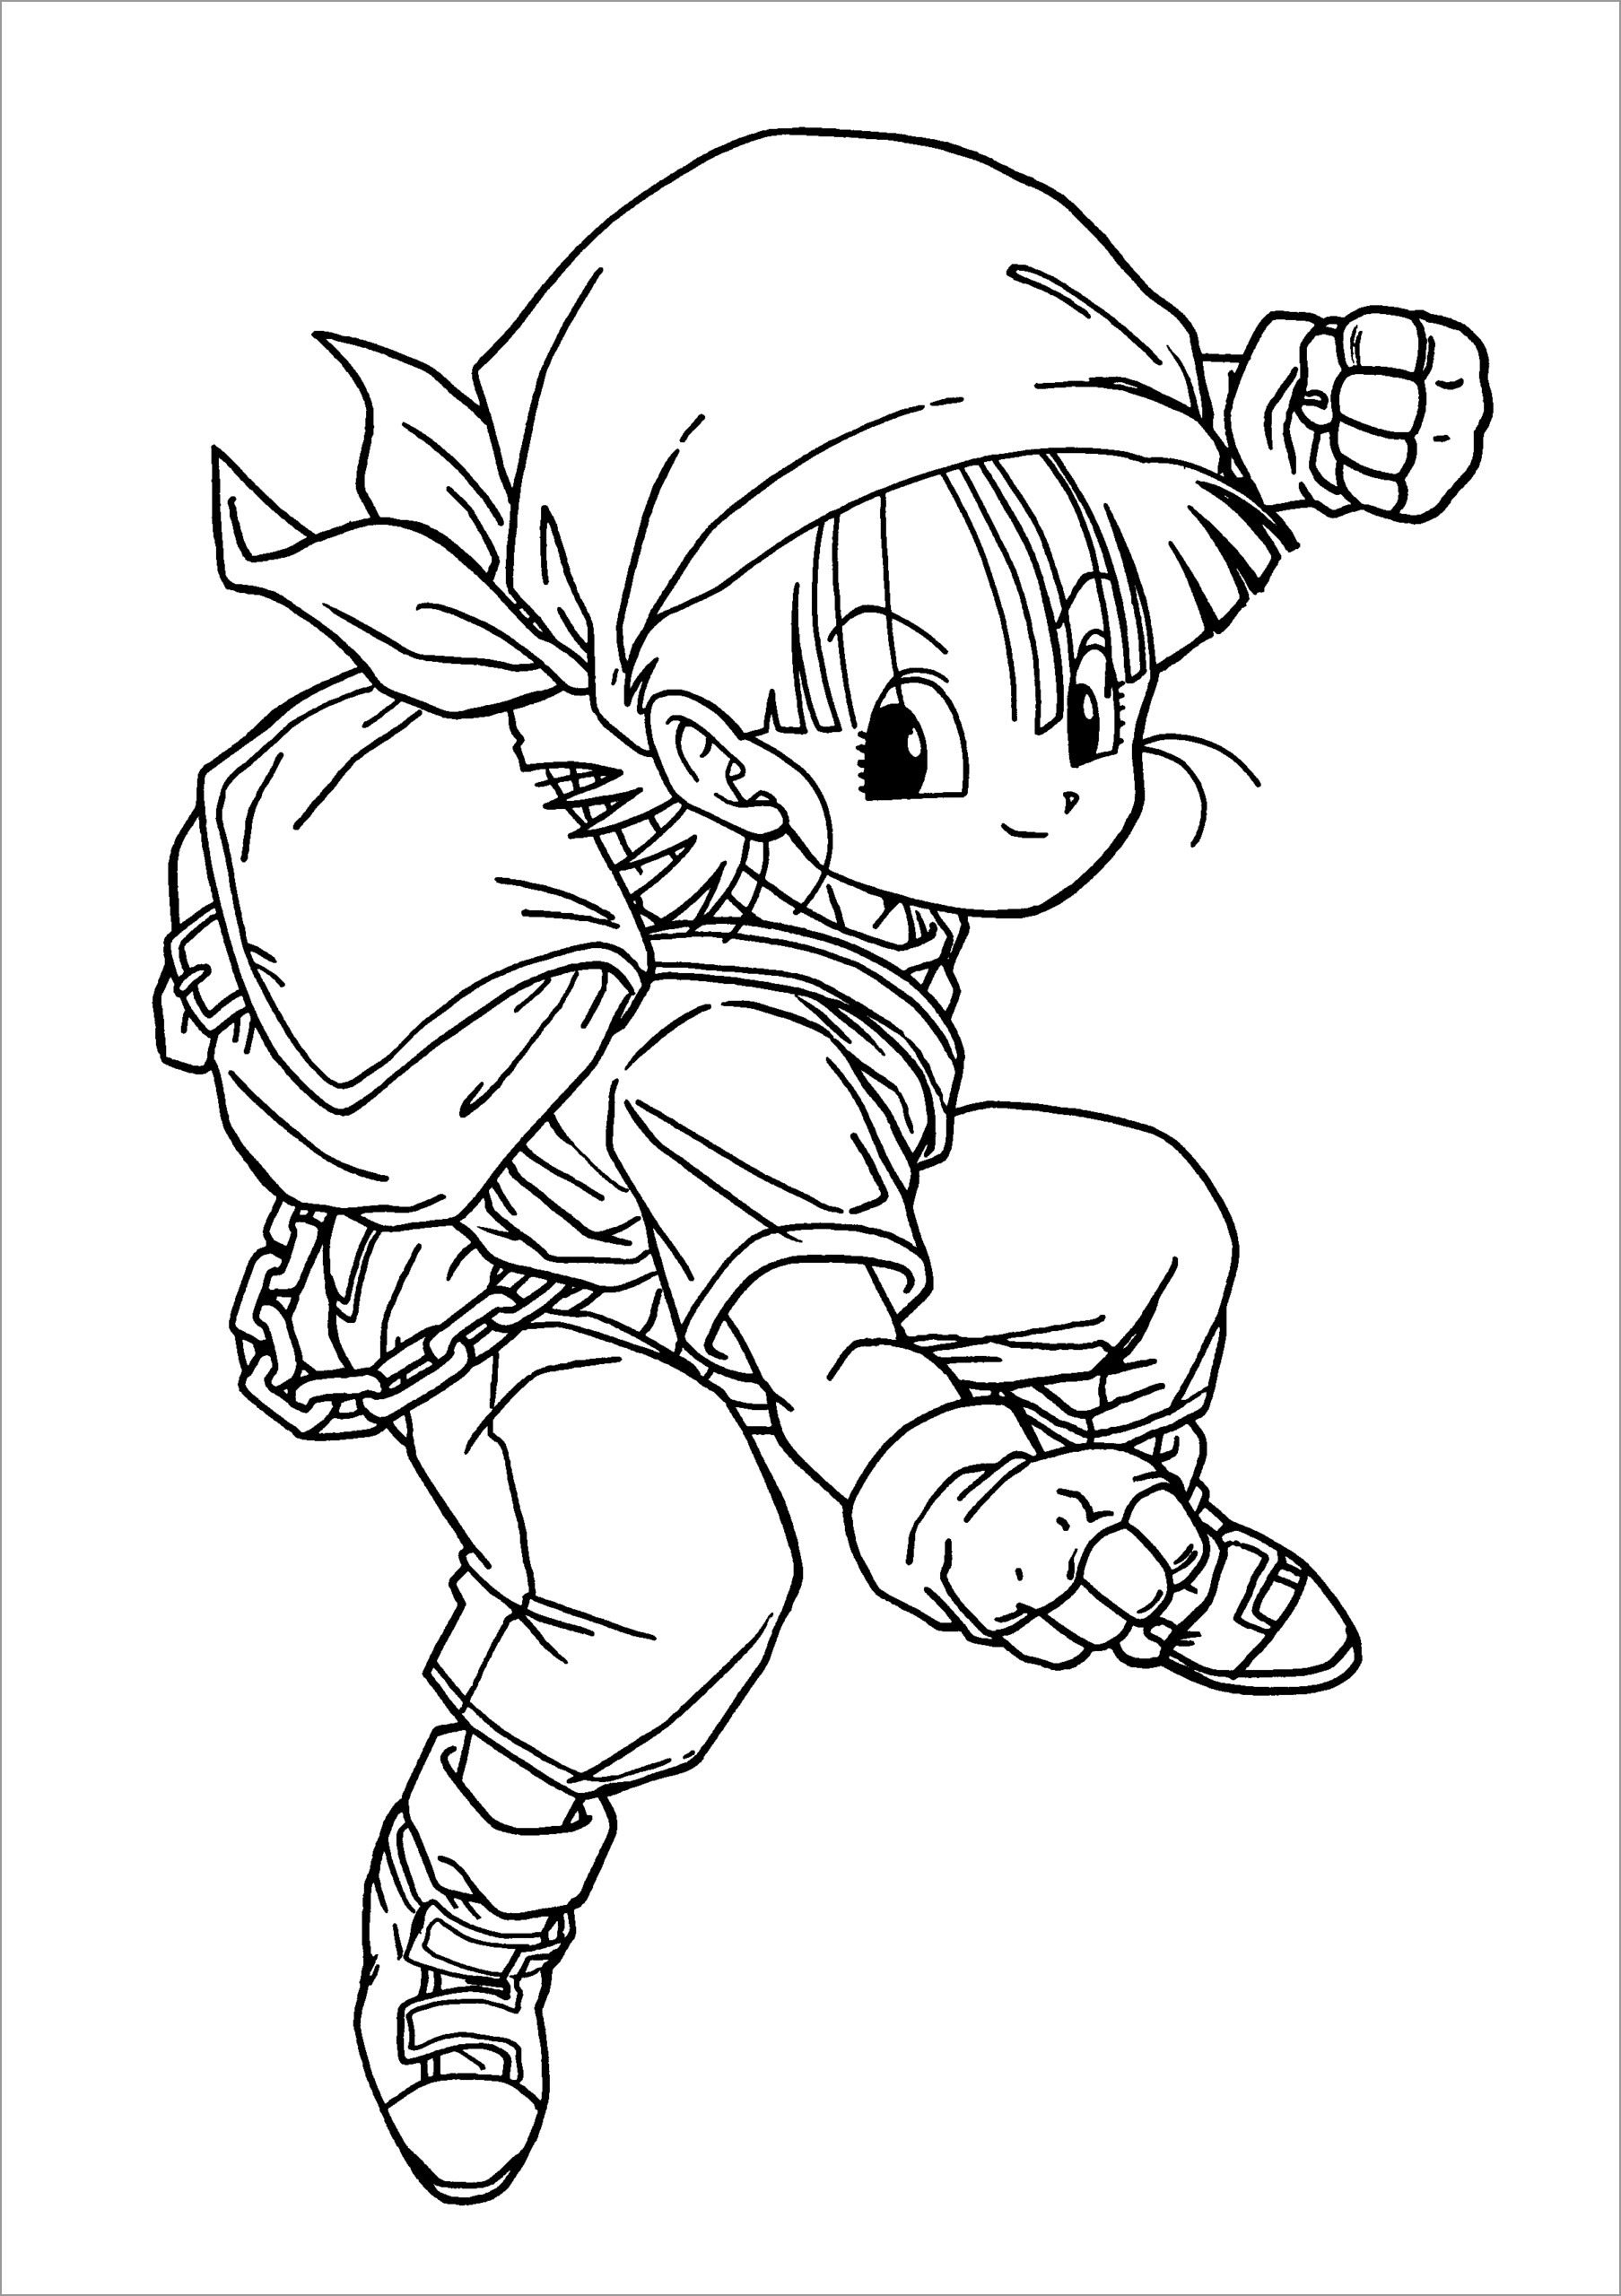 Dragon Ball Z Coloring Page Trunks